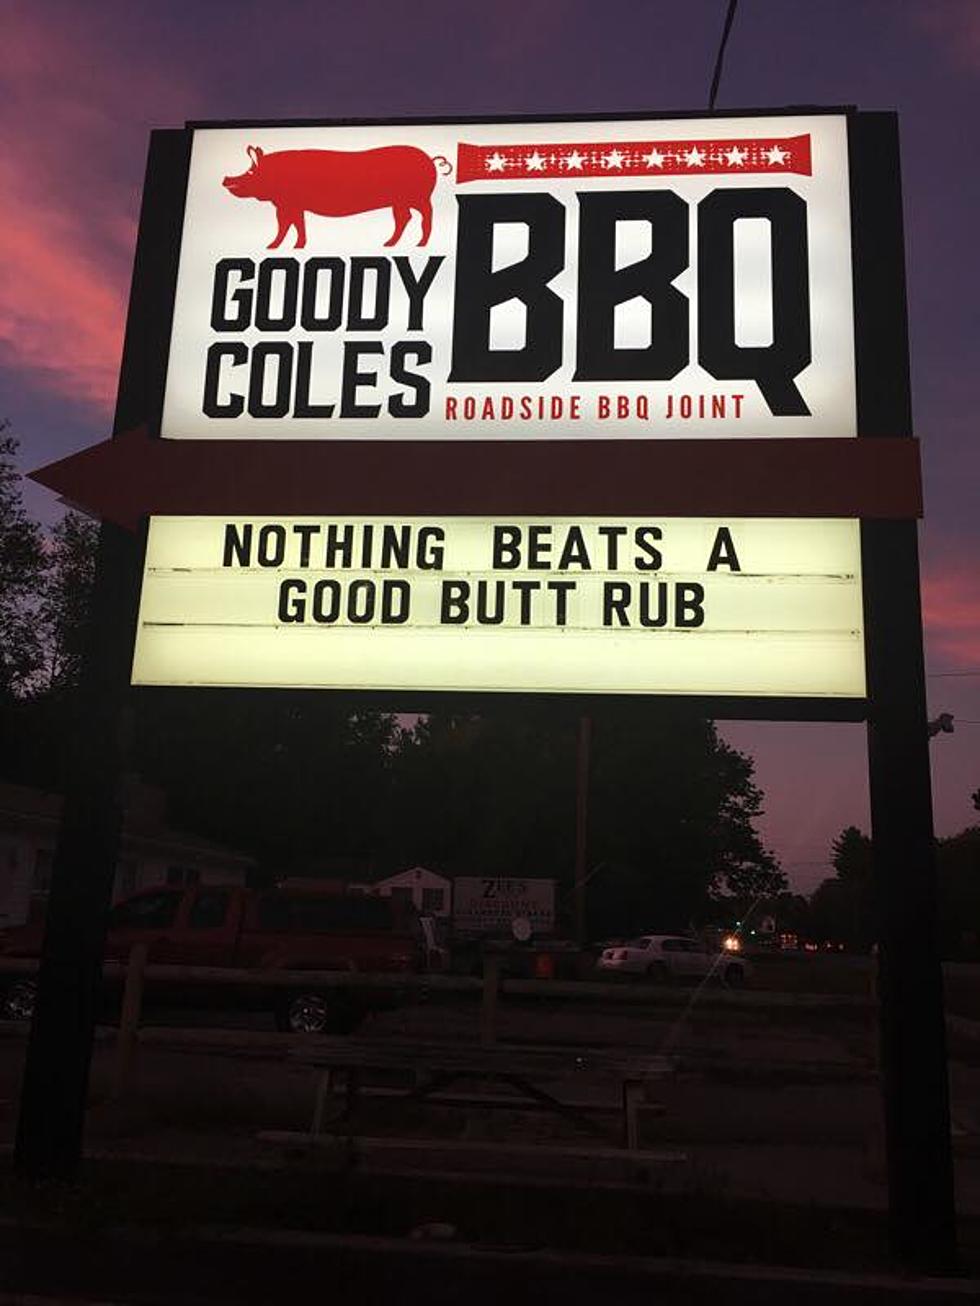 First We Feast.com Says Goody Coles Smokehouse Is The Best BBQ In NH